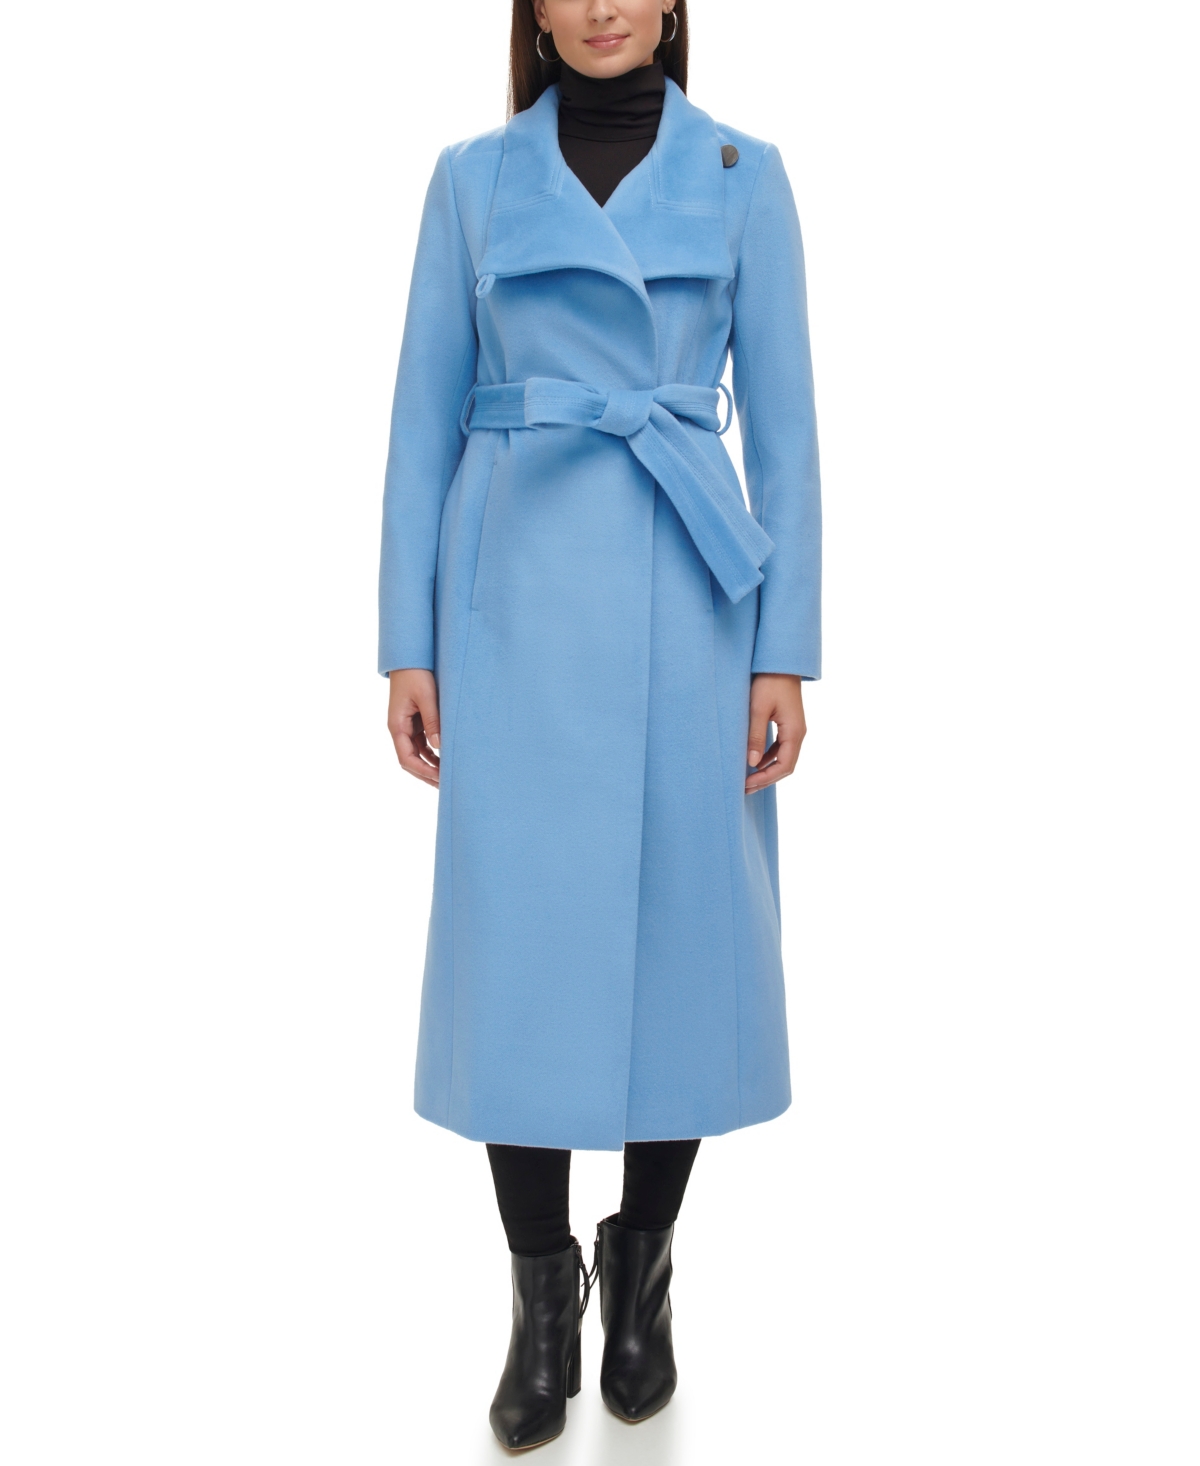 Women's Belted Maxi Wool Coat with Fenced Collar - Sage